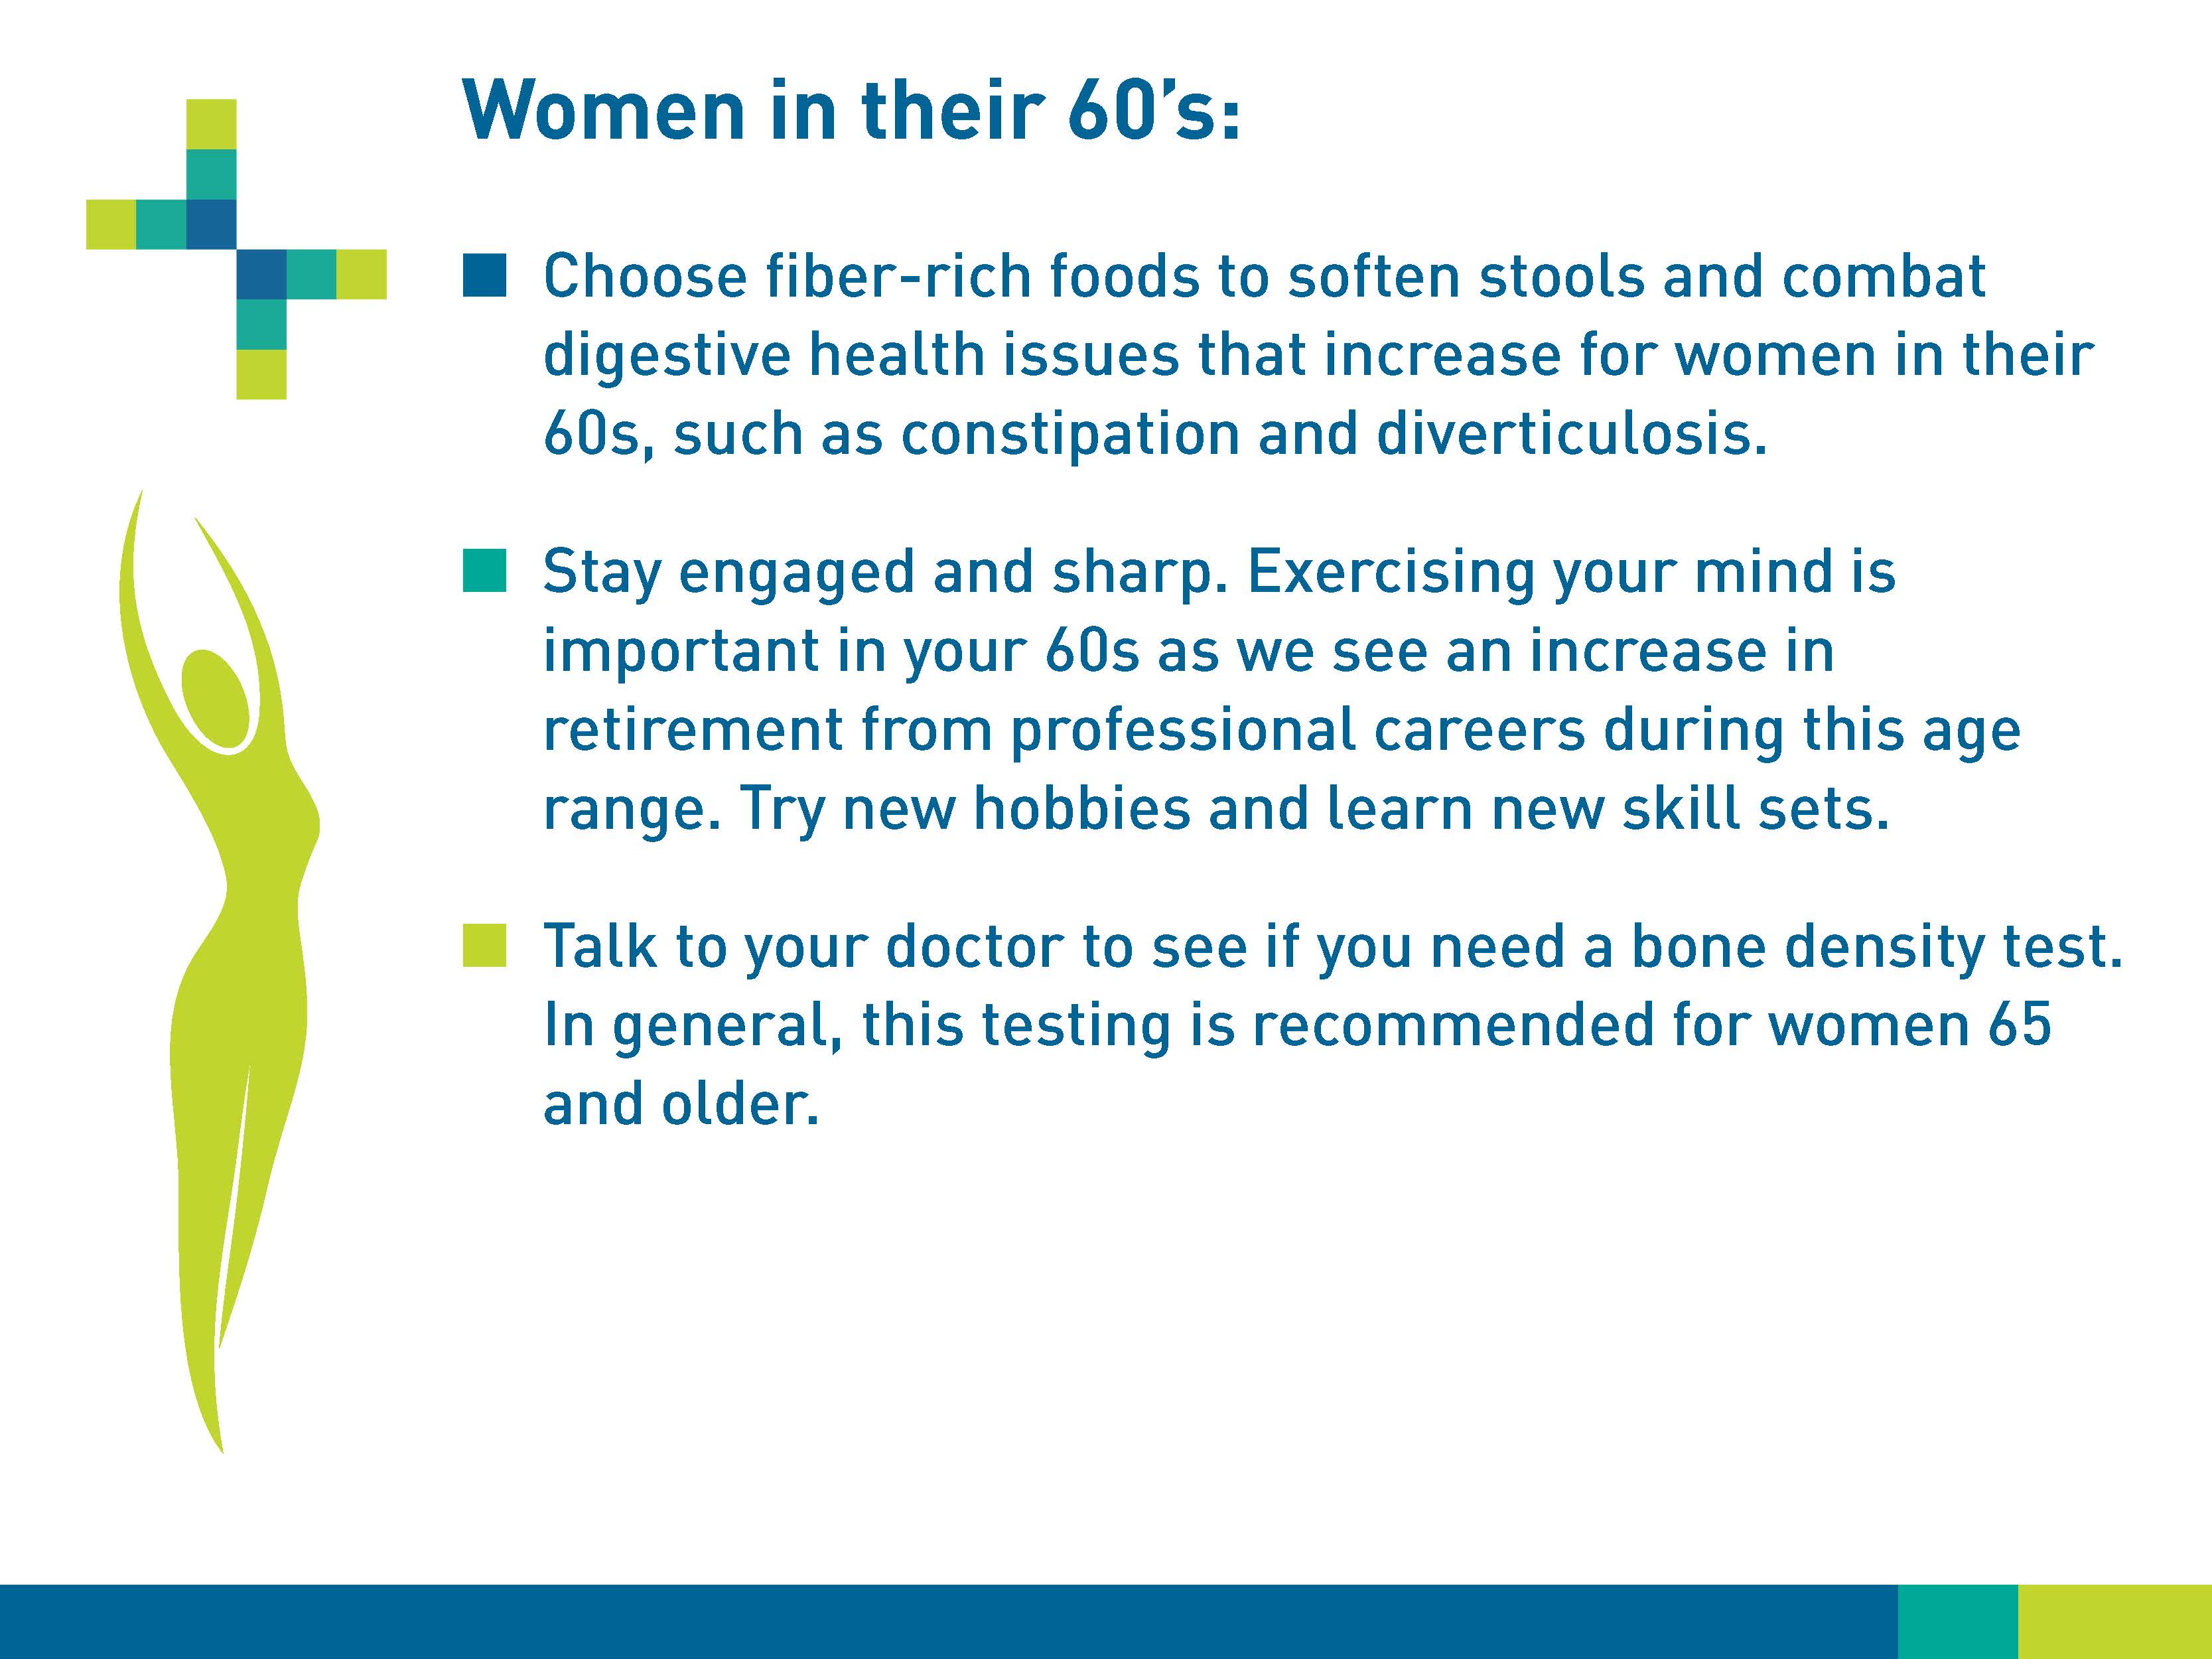 Women in their 60s: Choose fiber-rich foods to soften stools and combat digestive health issues that increase for women in their 60s, such as constipation and diverticulosis. Stay engaged and sharp. Exercising your mind is important in your 60s as we see an increase in retirement from professional careers during this age range. Try new hobbies and learn new skillsets. Talk to your doctor to see if you need a bone density test. In general, this testing is recommended for women 65 and older.